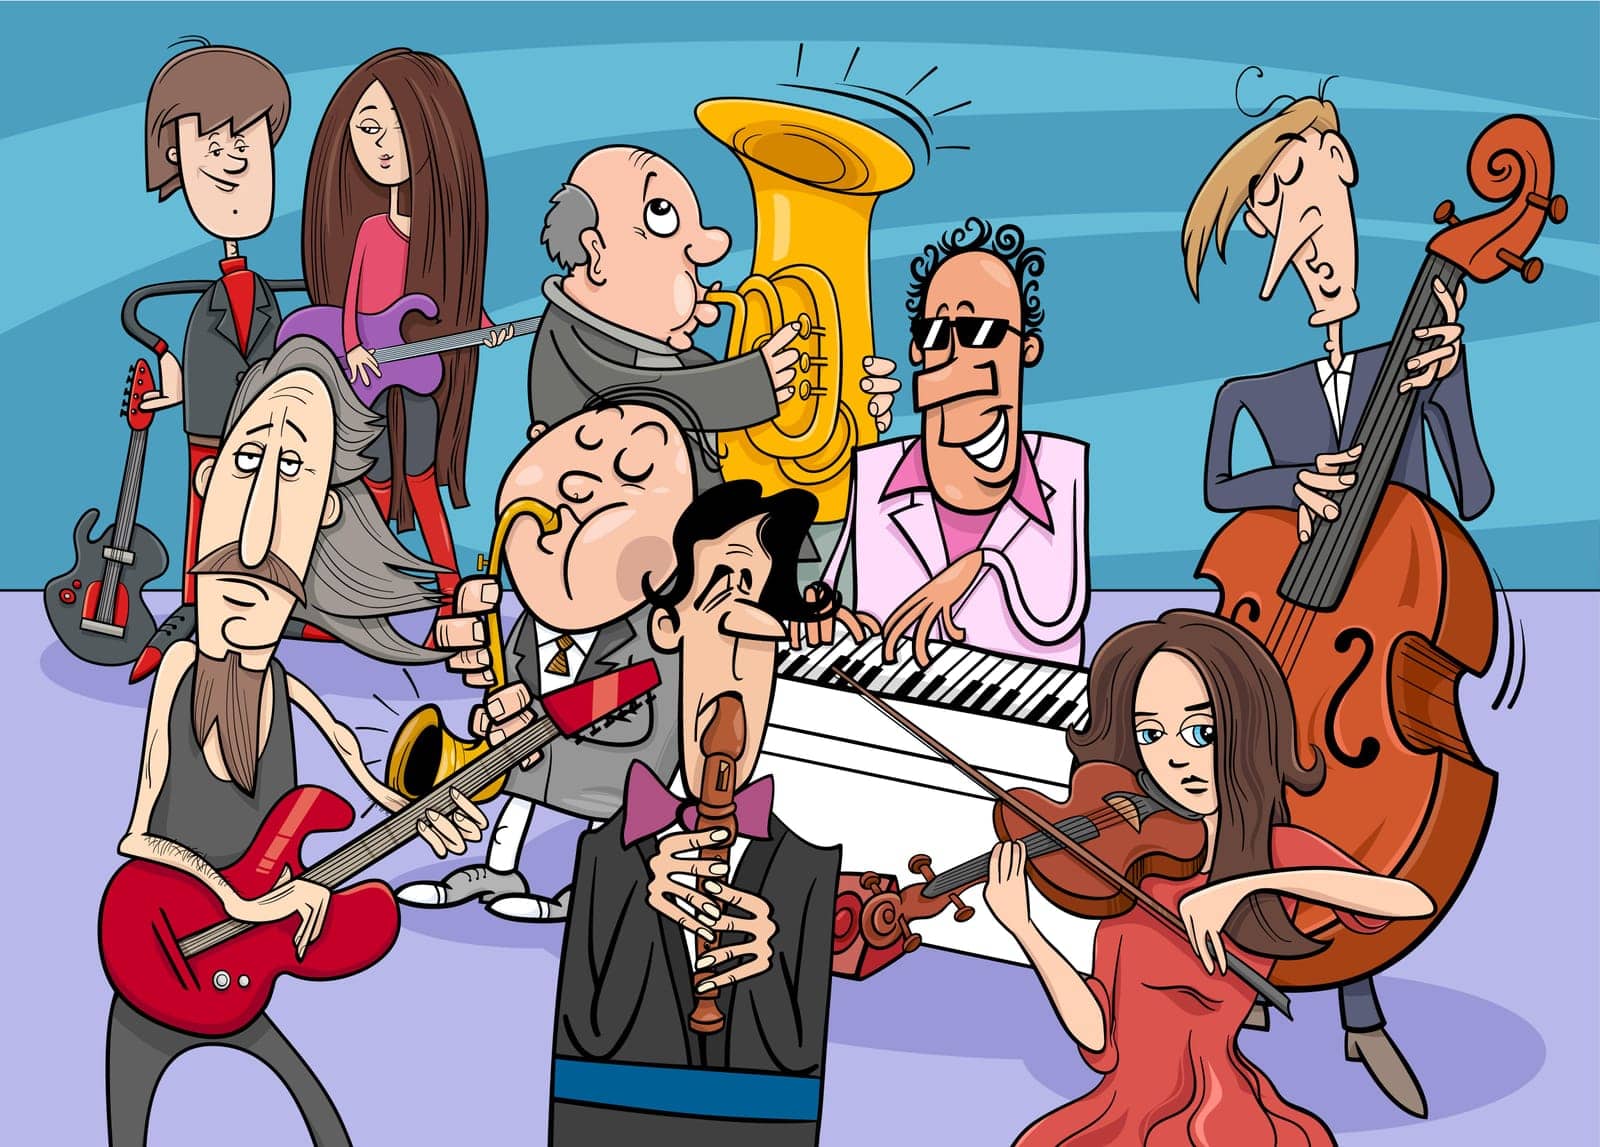 Cartoon illustration of musicians group or musical band with comic characters